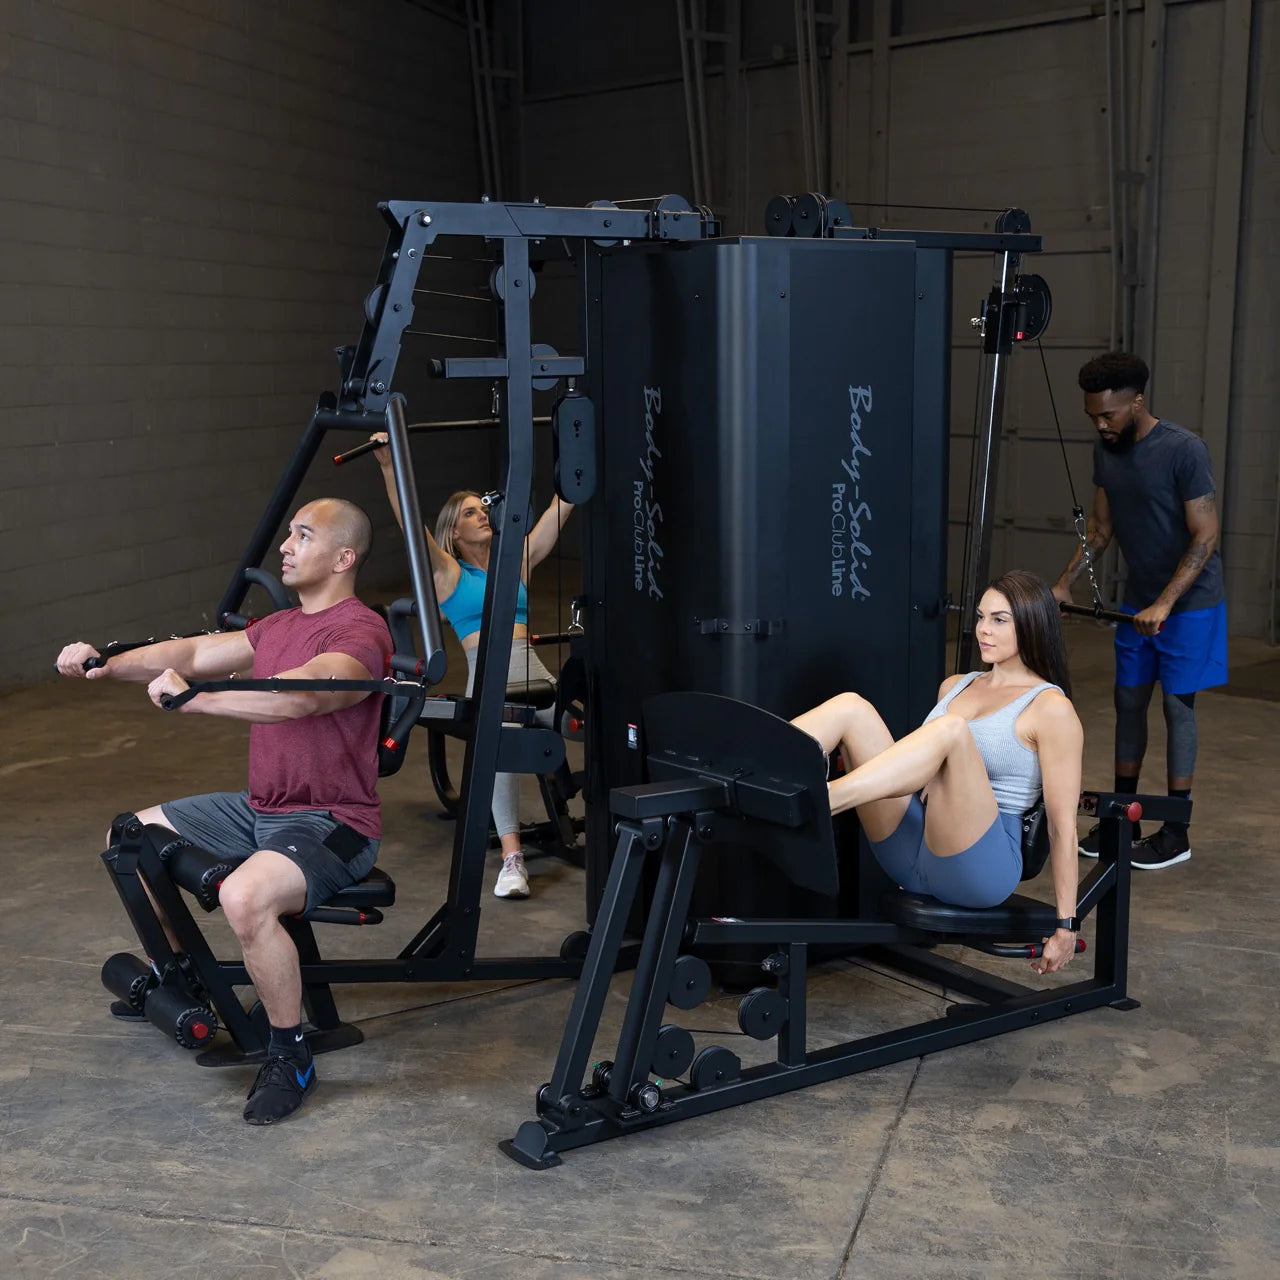 Leg Press & Calf Raise on Body Solid Pro Clubline S1000 Four-Stack Gym